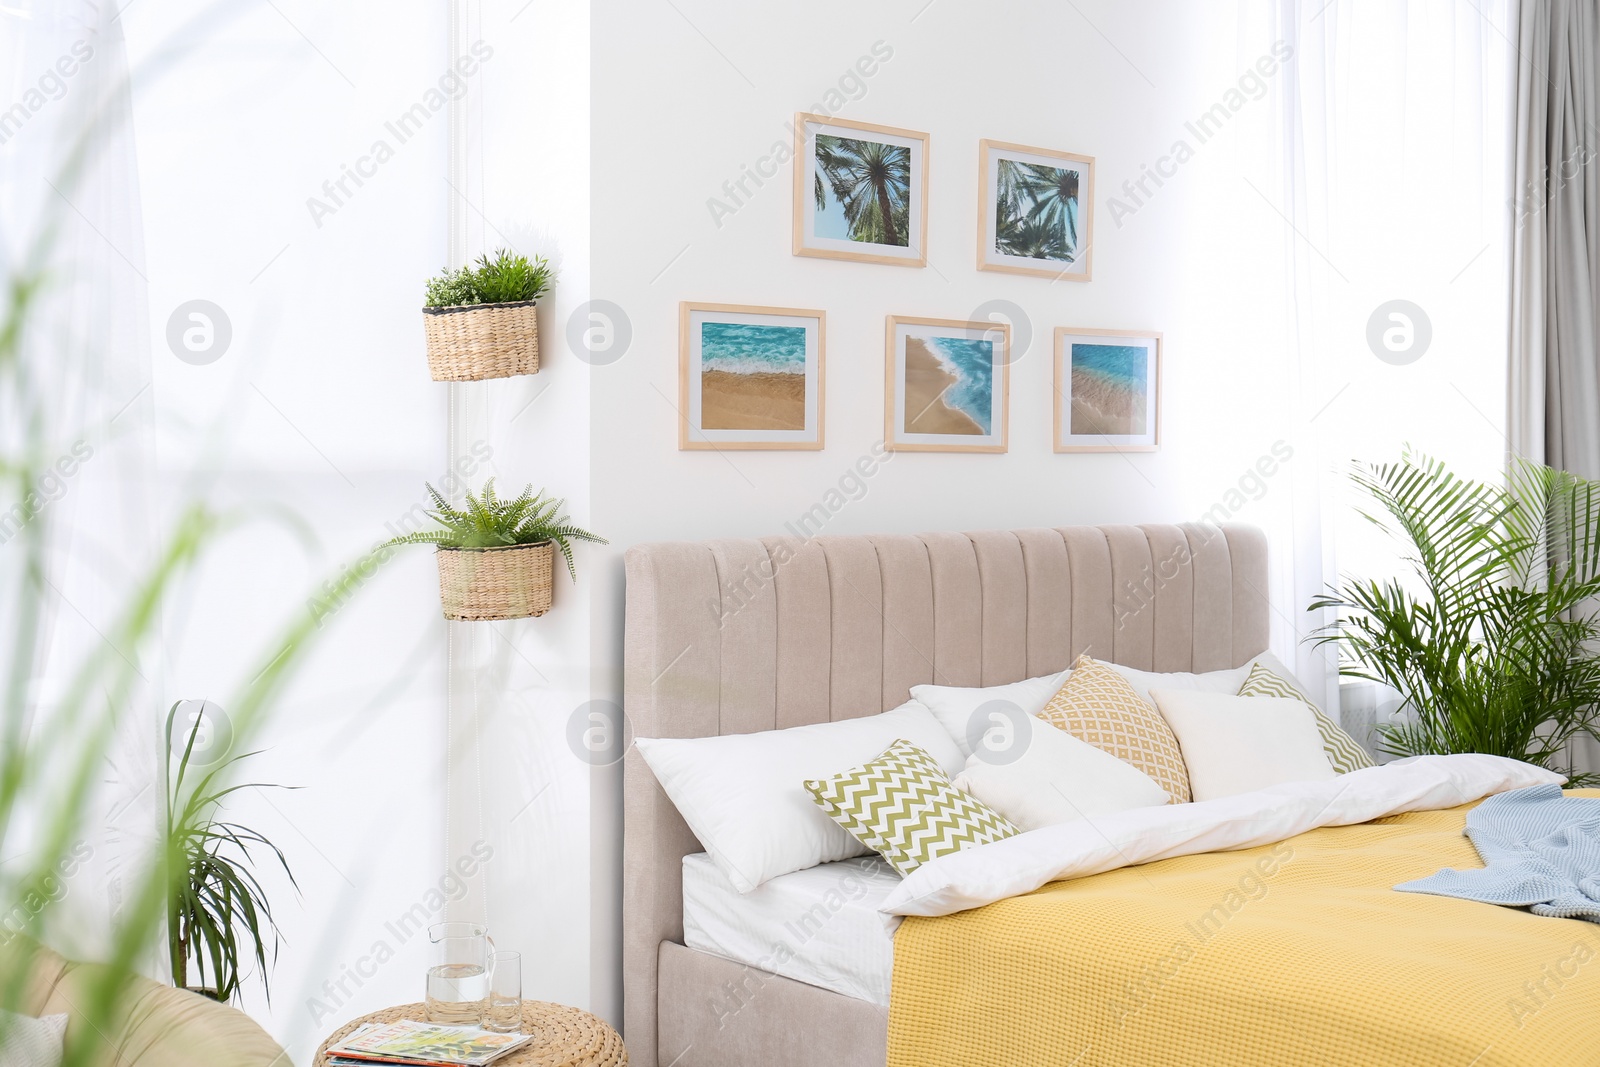 Photo of Stylish room interior with large comfortable bed and beautiful paintings